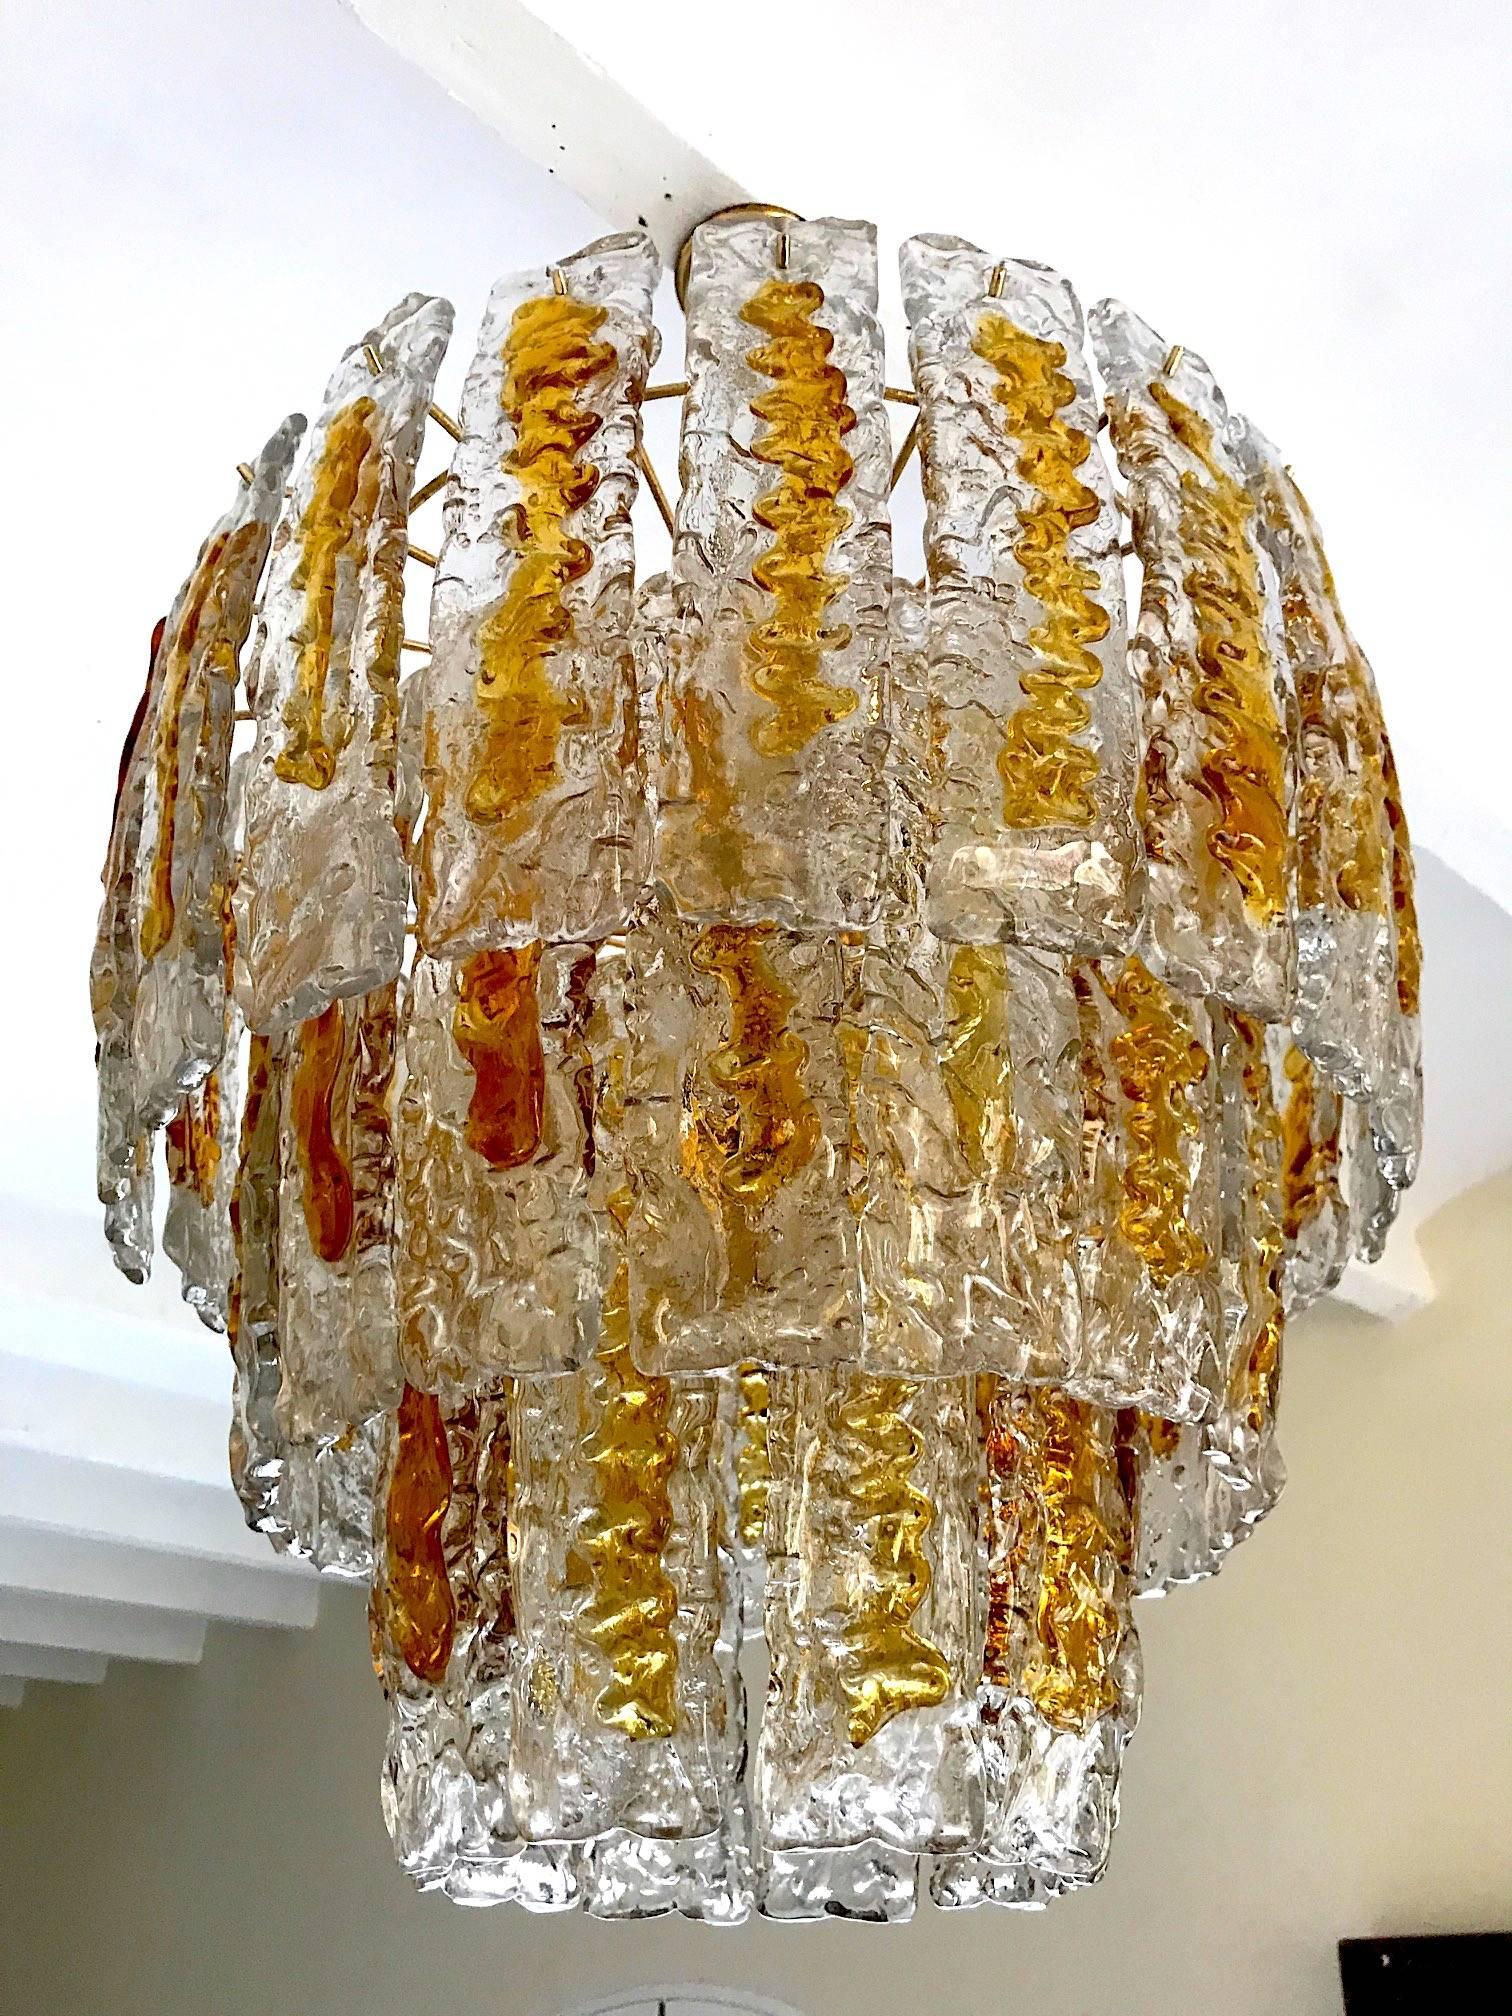 Italian Mid-Century Modern amber colored glass chandelier handblown in Murano by Mazzega. This Piece has a double layer of glass and imparts a warm light. The inner layer has ten pieces and the outer layer has 49 long pieces with both forming an